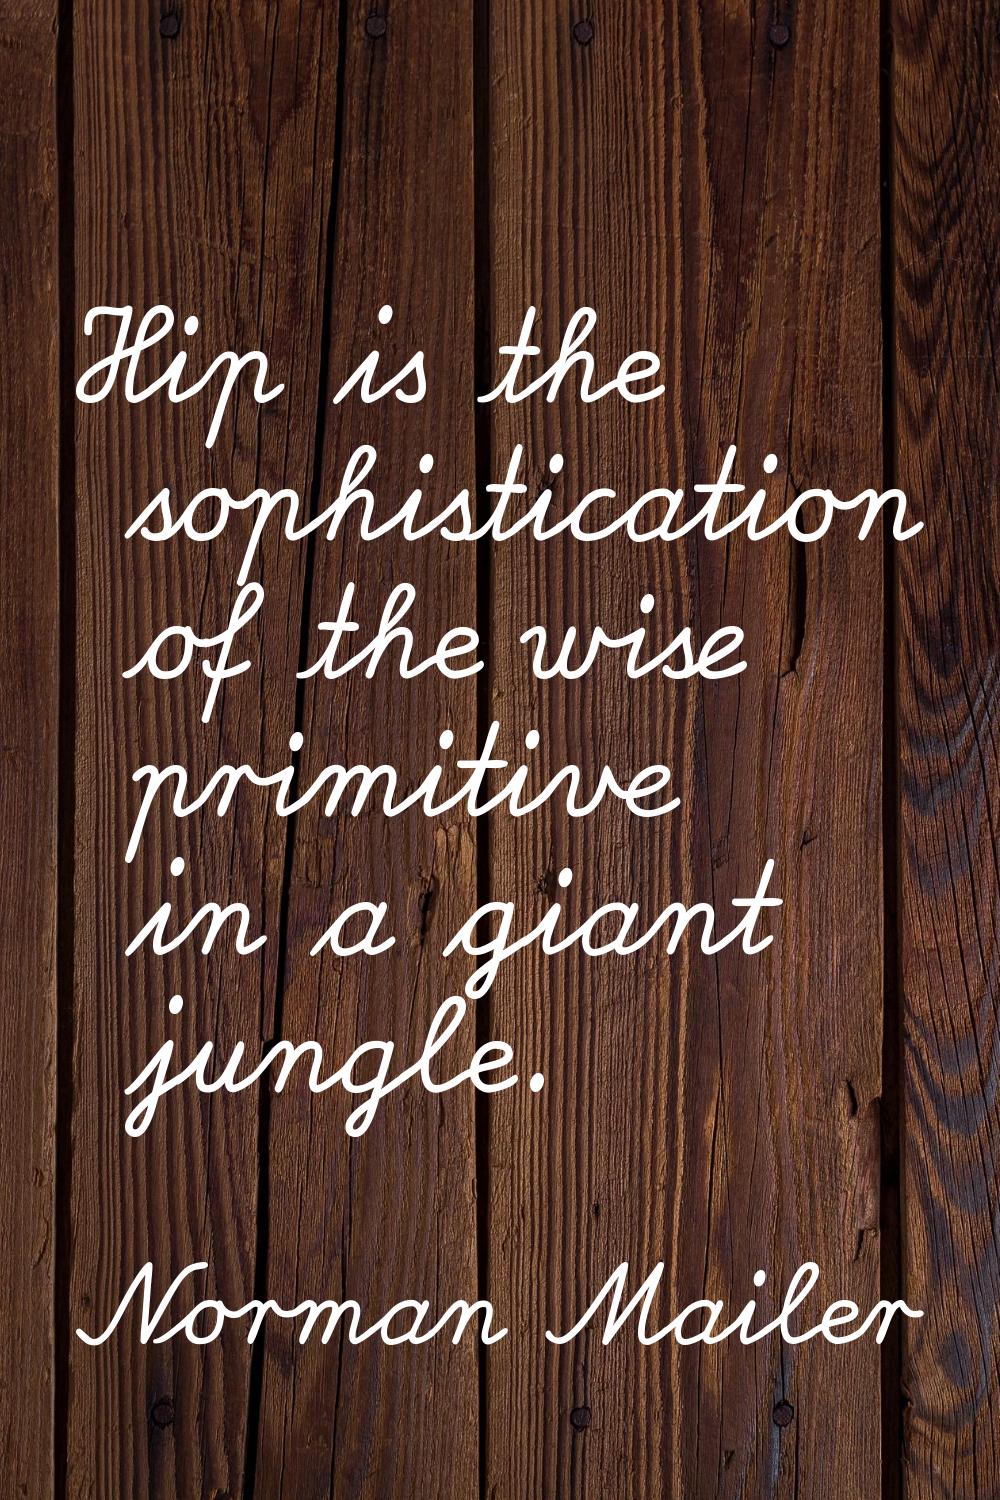 Hip is the sophistication of the wise primitive in a giant jungle.